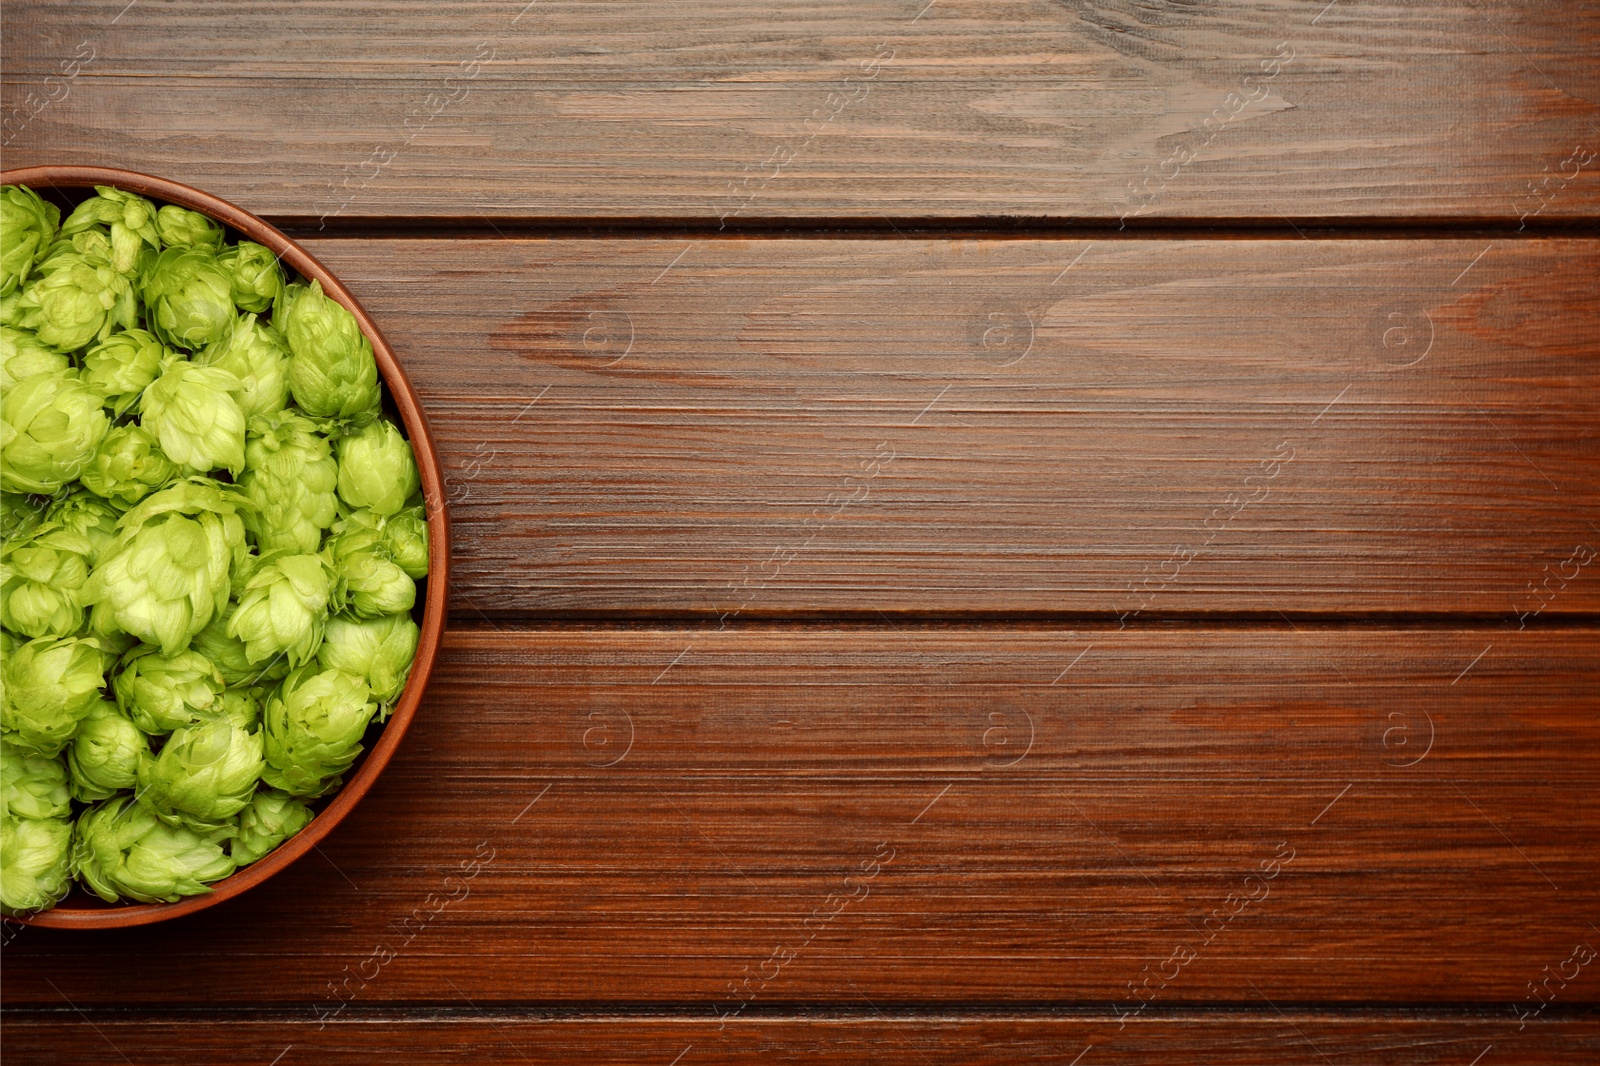 Photo of Bowl with fresh green hops on wooden table, top view. Space for text